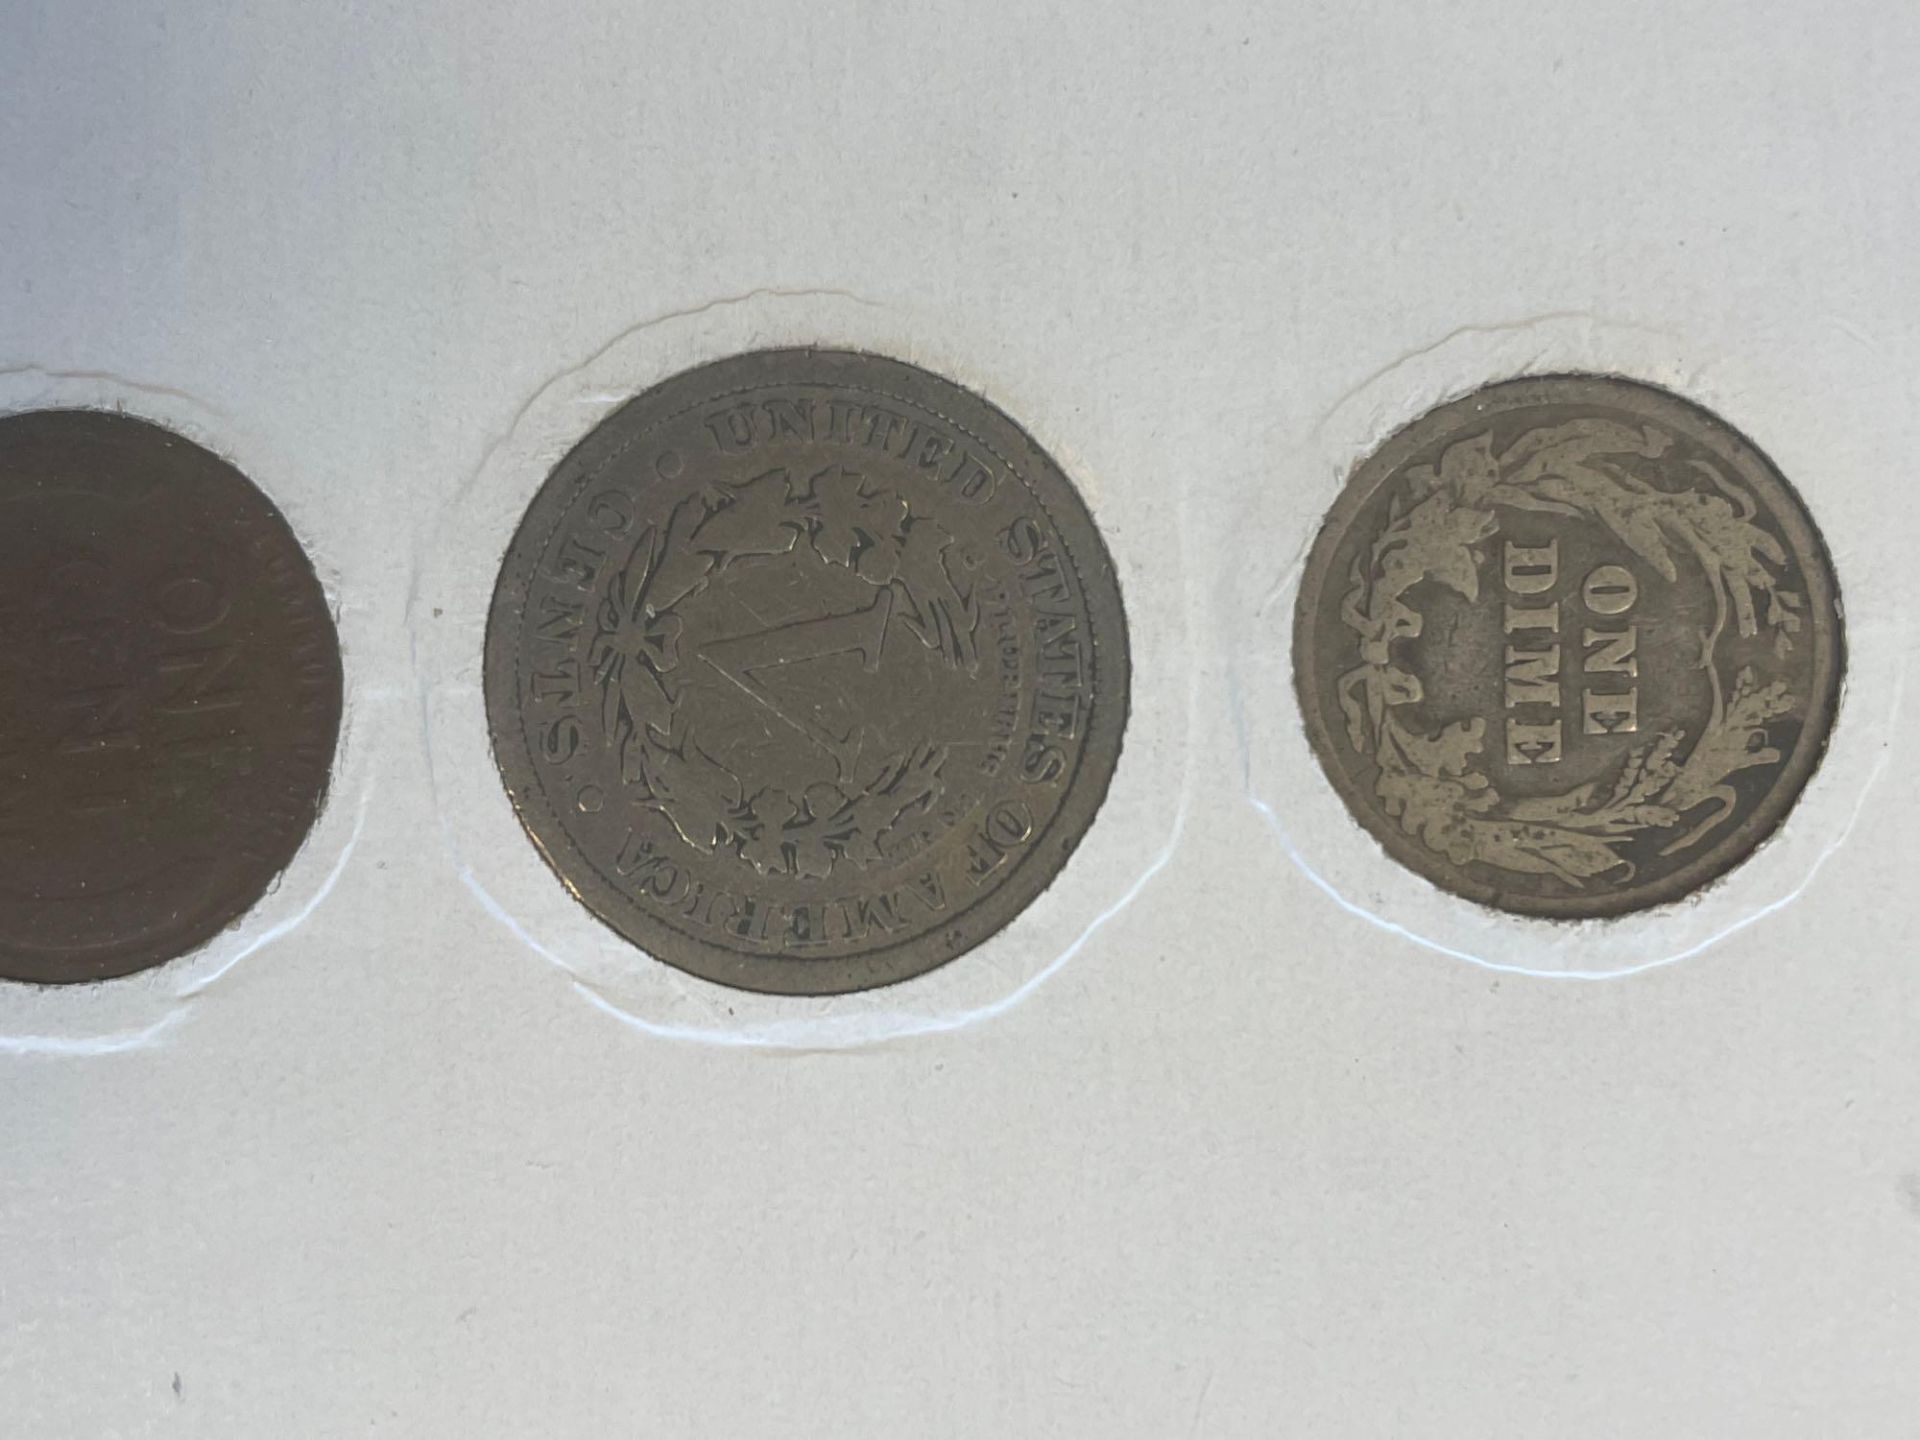 1911 Chevrolet coin set - Image 5 of 6